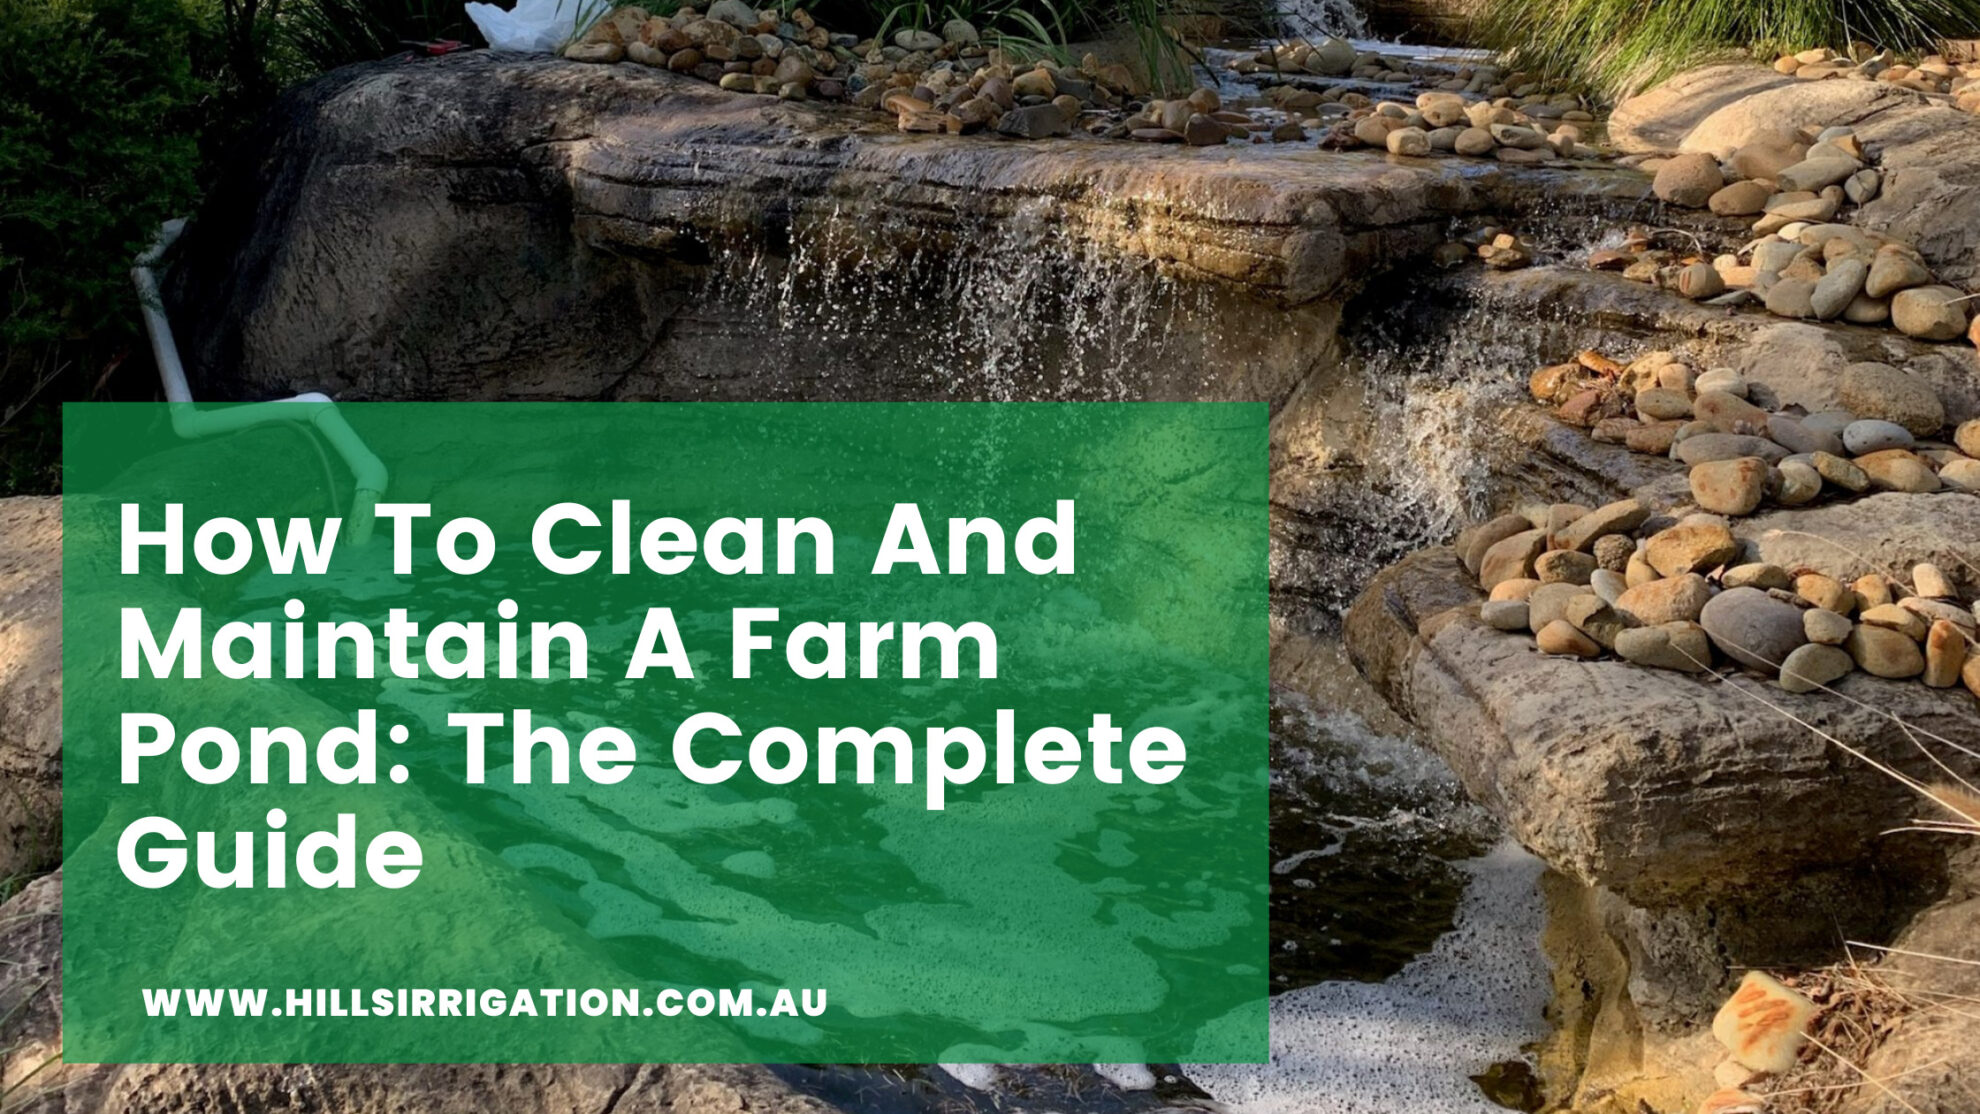 How To Clean And Maintain A Farm Pond | The Complete Guide